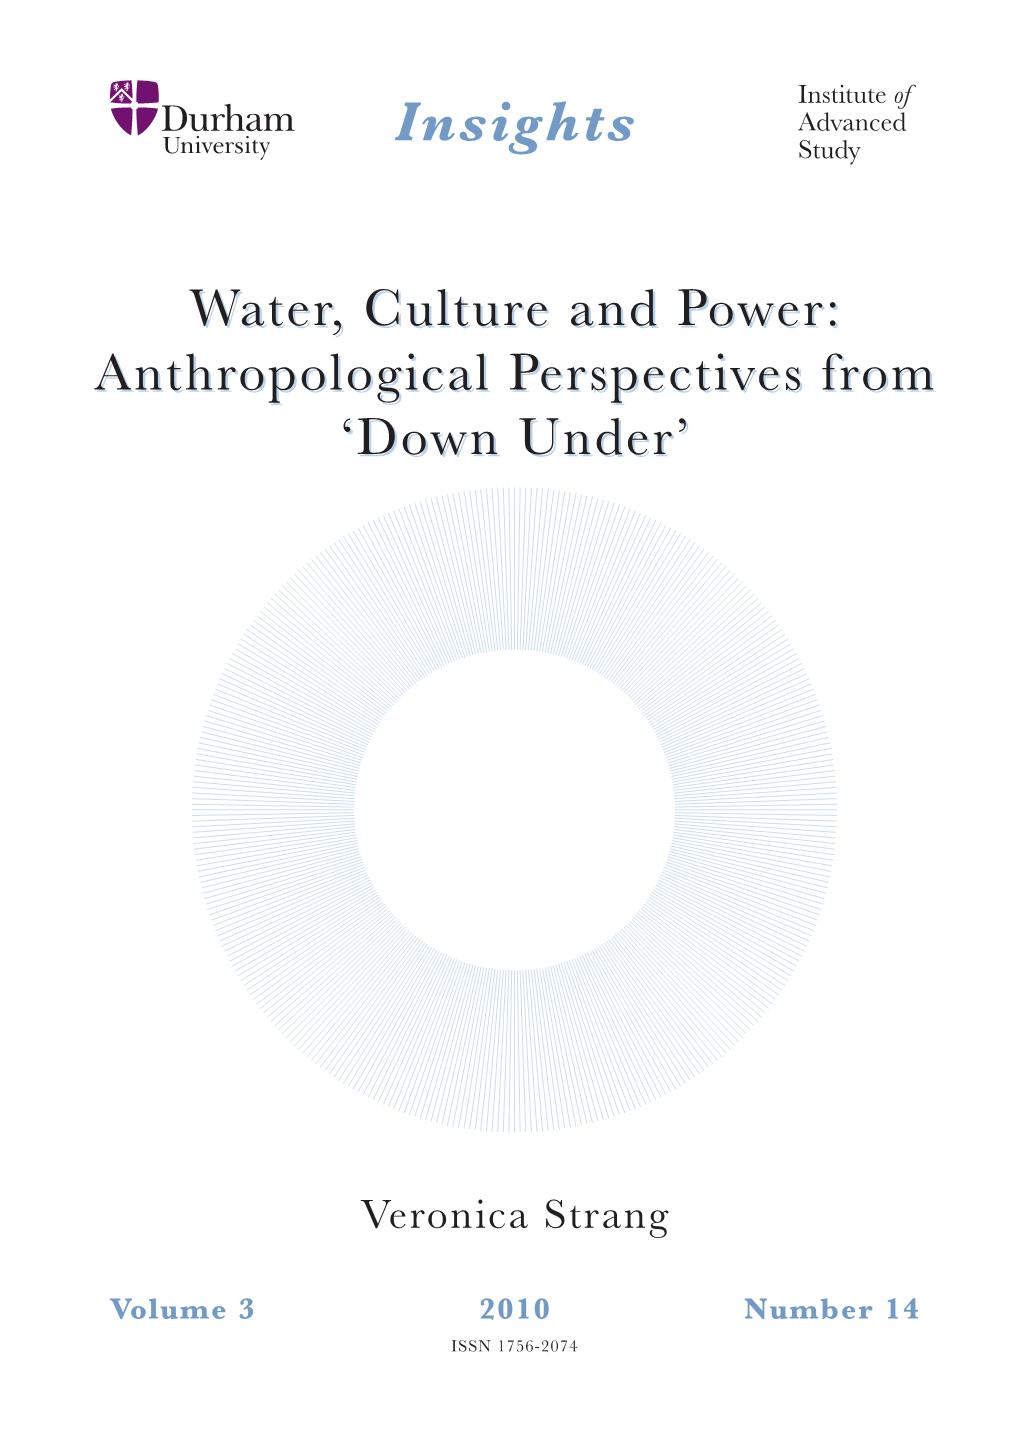 Water, Culture and Power: Anthropological Perspectives from ‘Down Under’